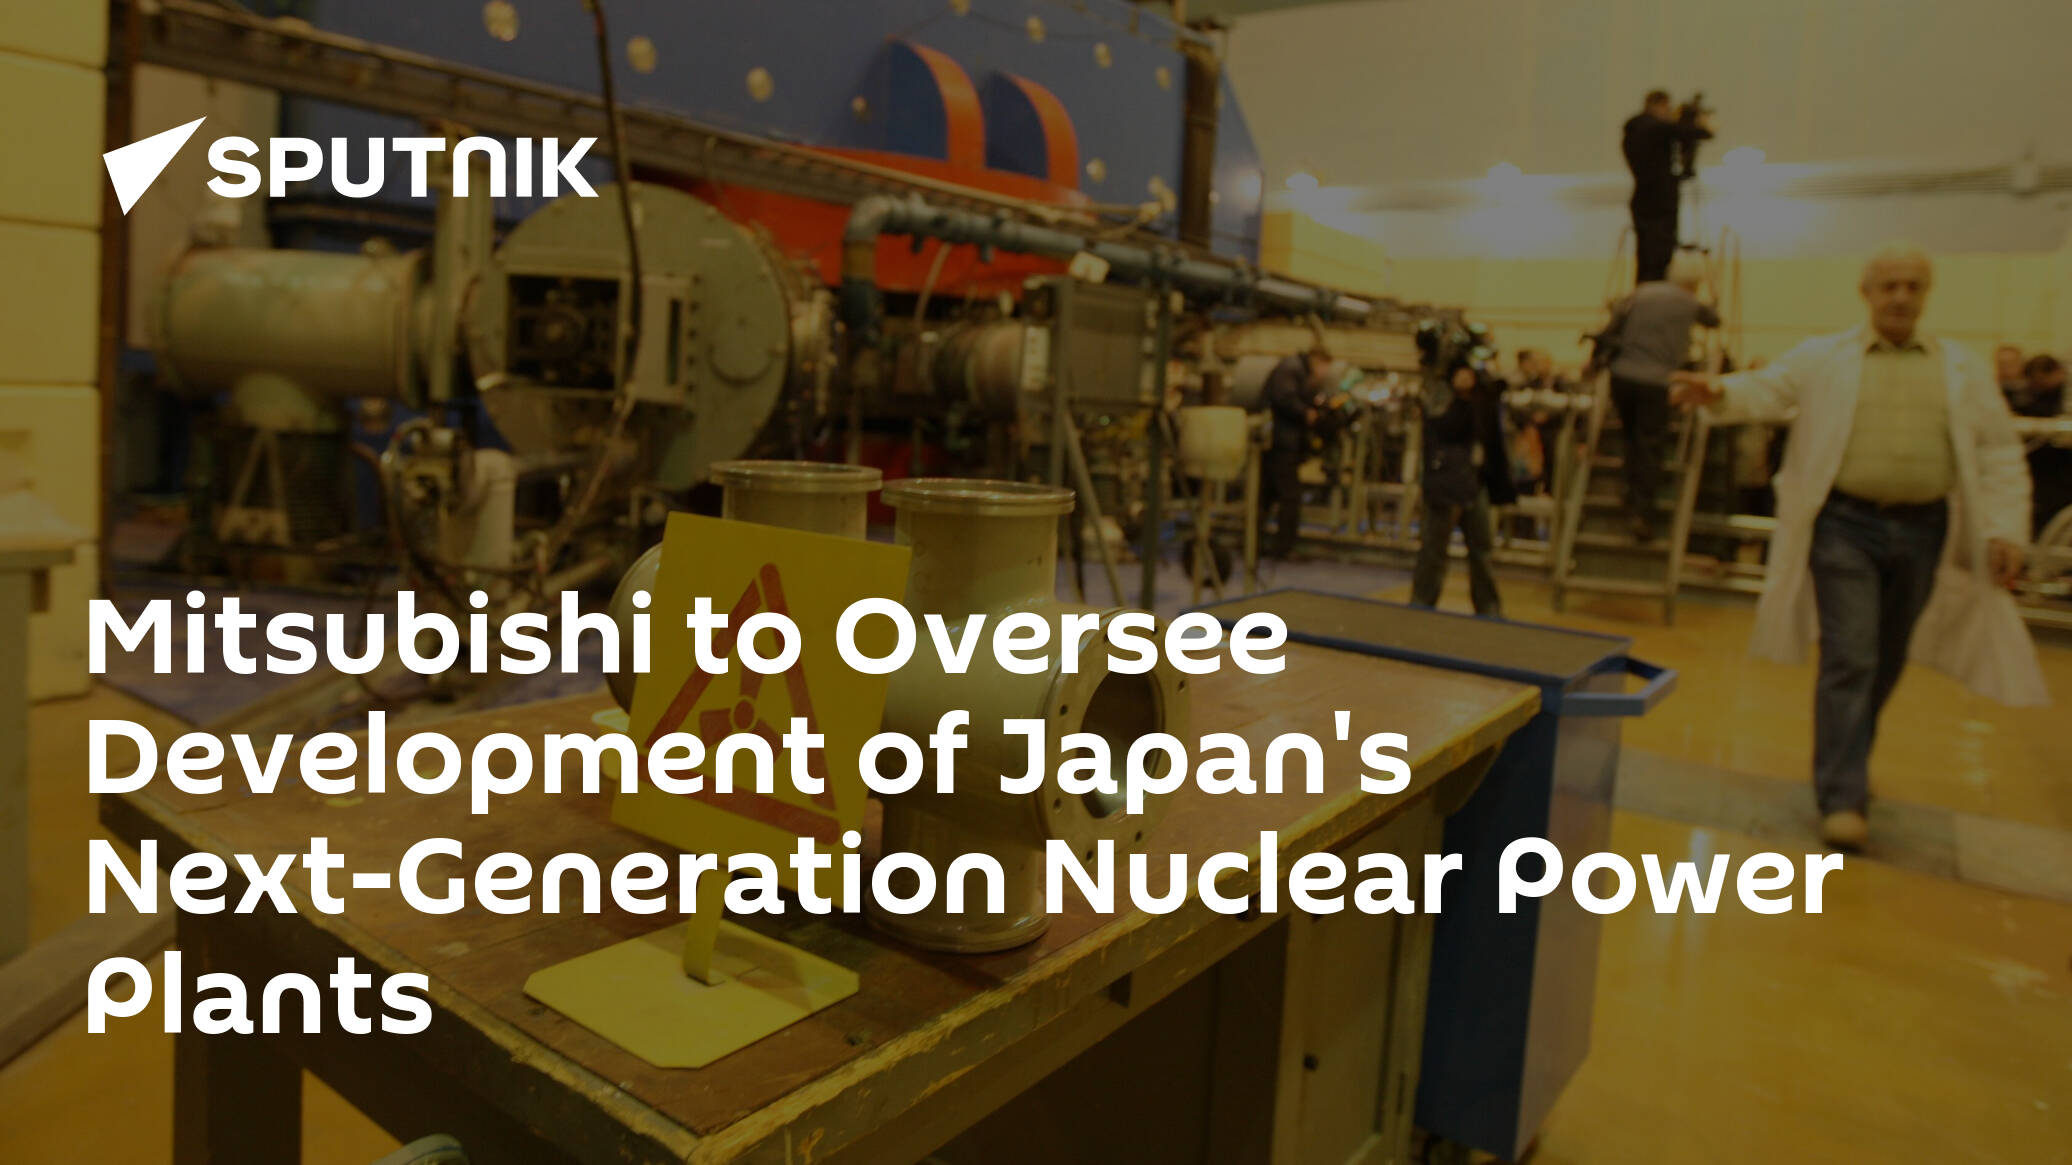 Mitsubishi to Oversee Development of Next-Generation NPPs in Japan